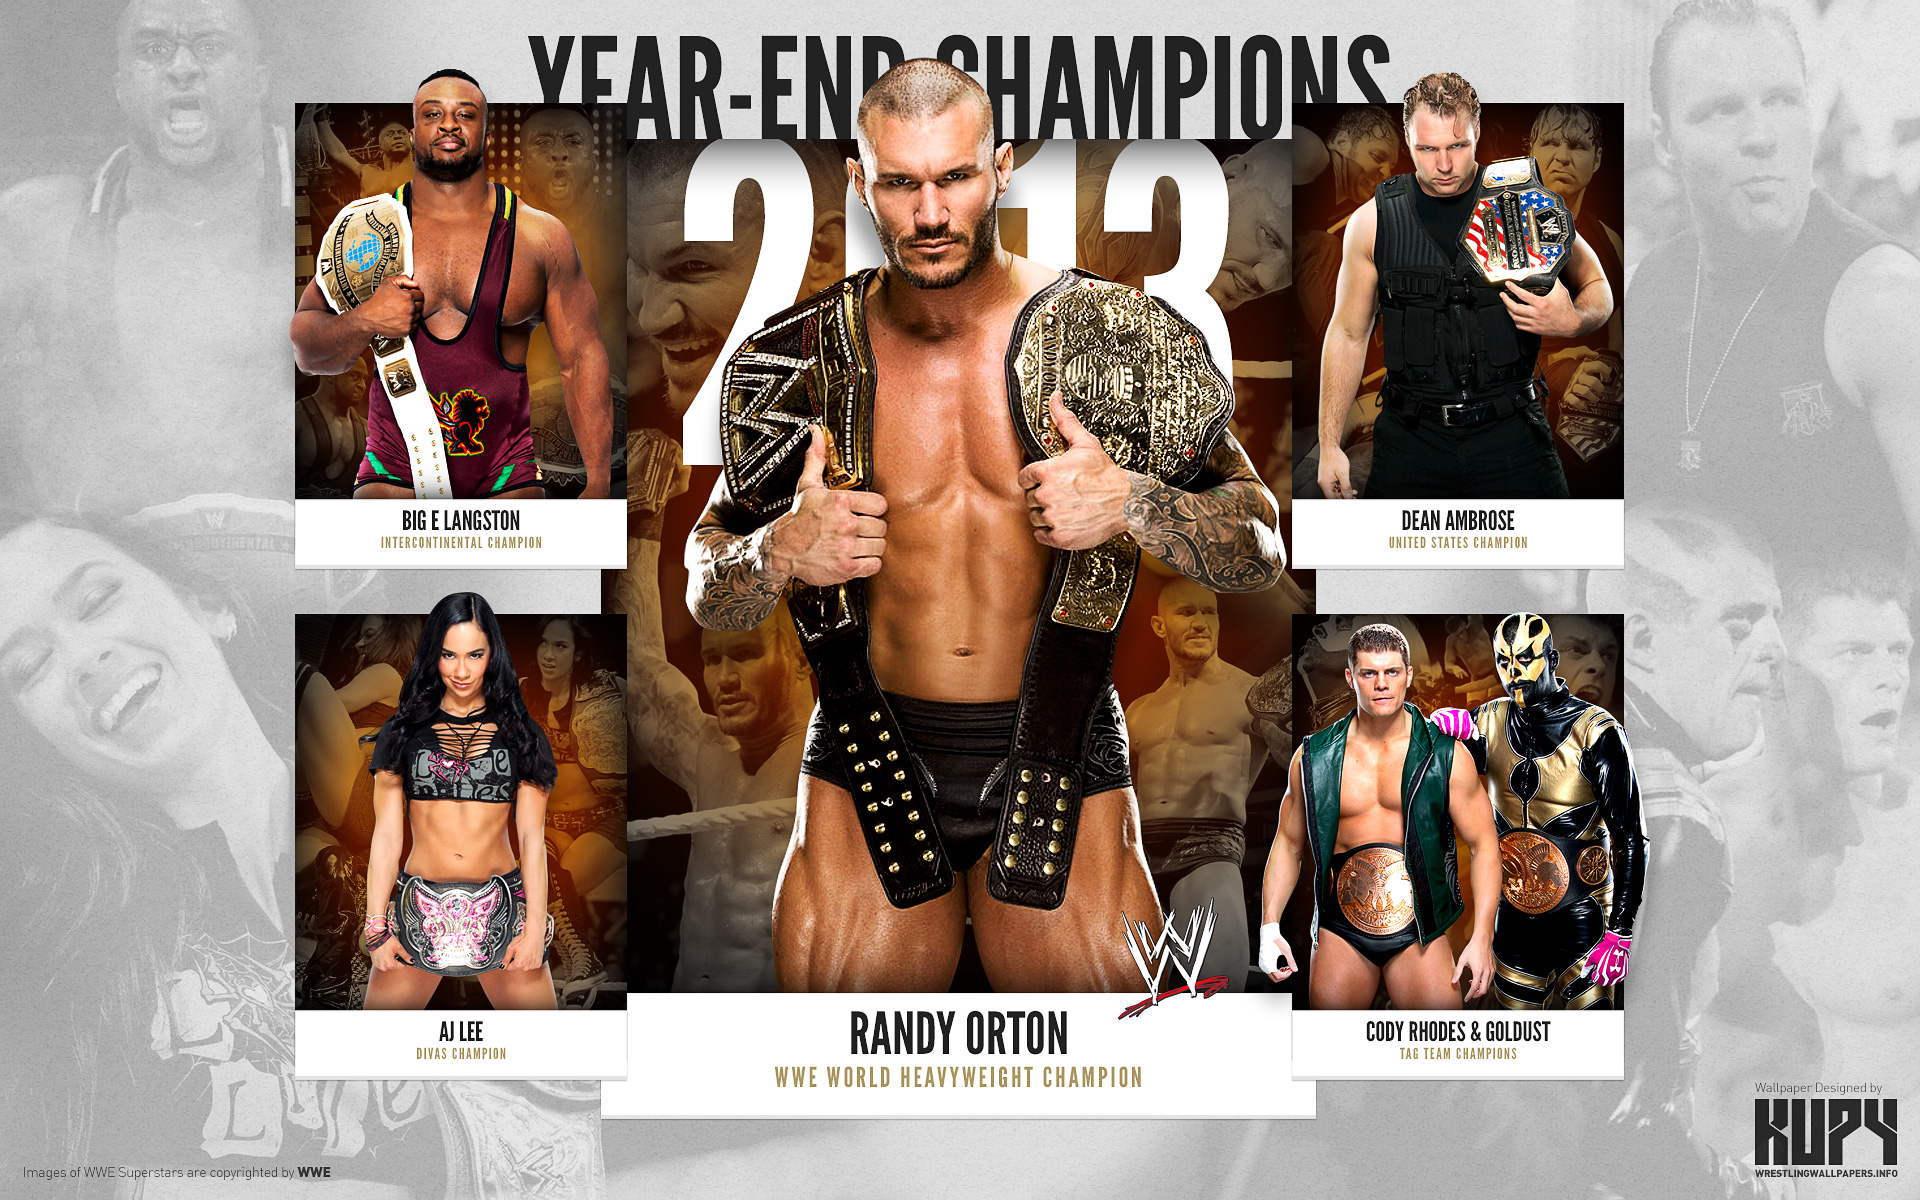 NEW 2013 WWE Year-End Champions wallpaper! - Kupy Wrestling Wallpapers